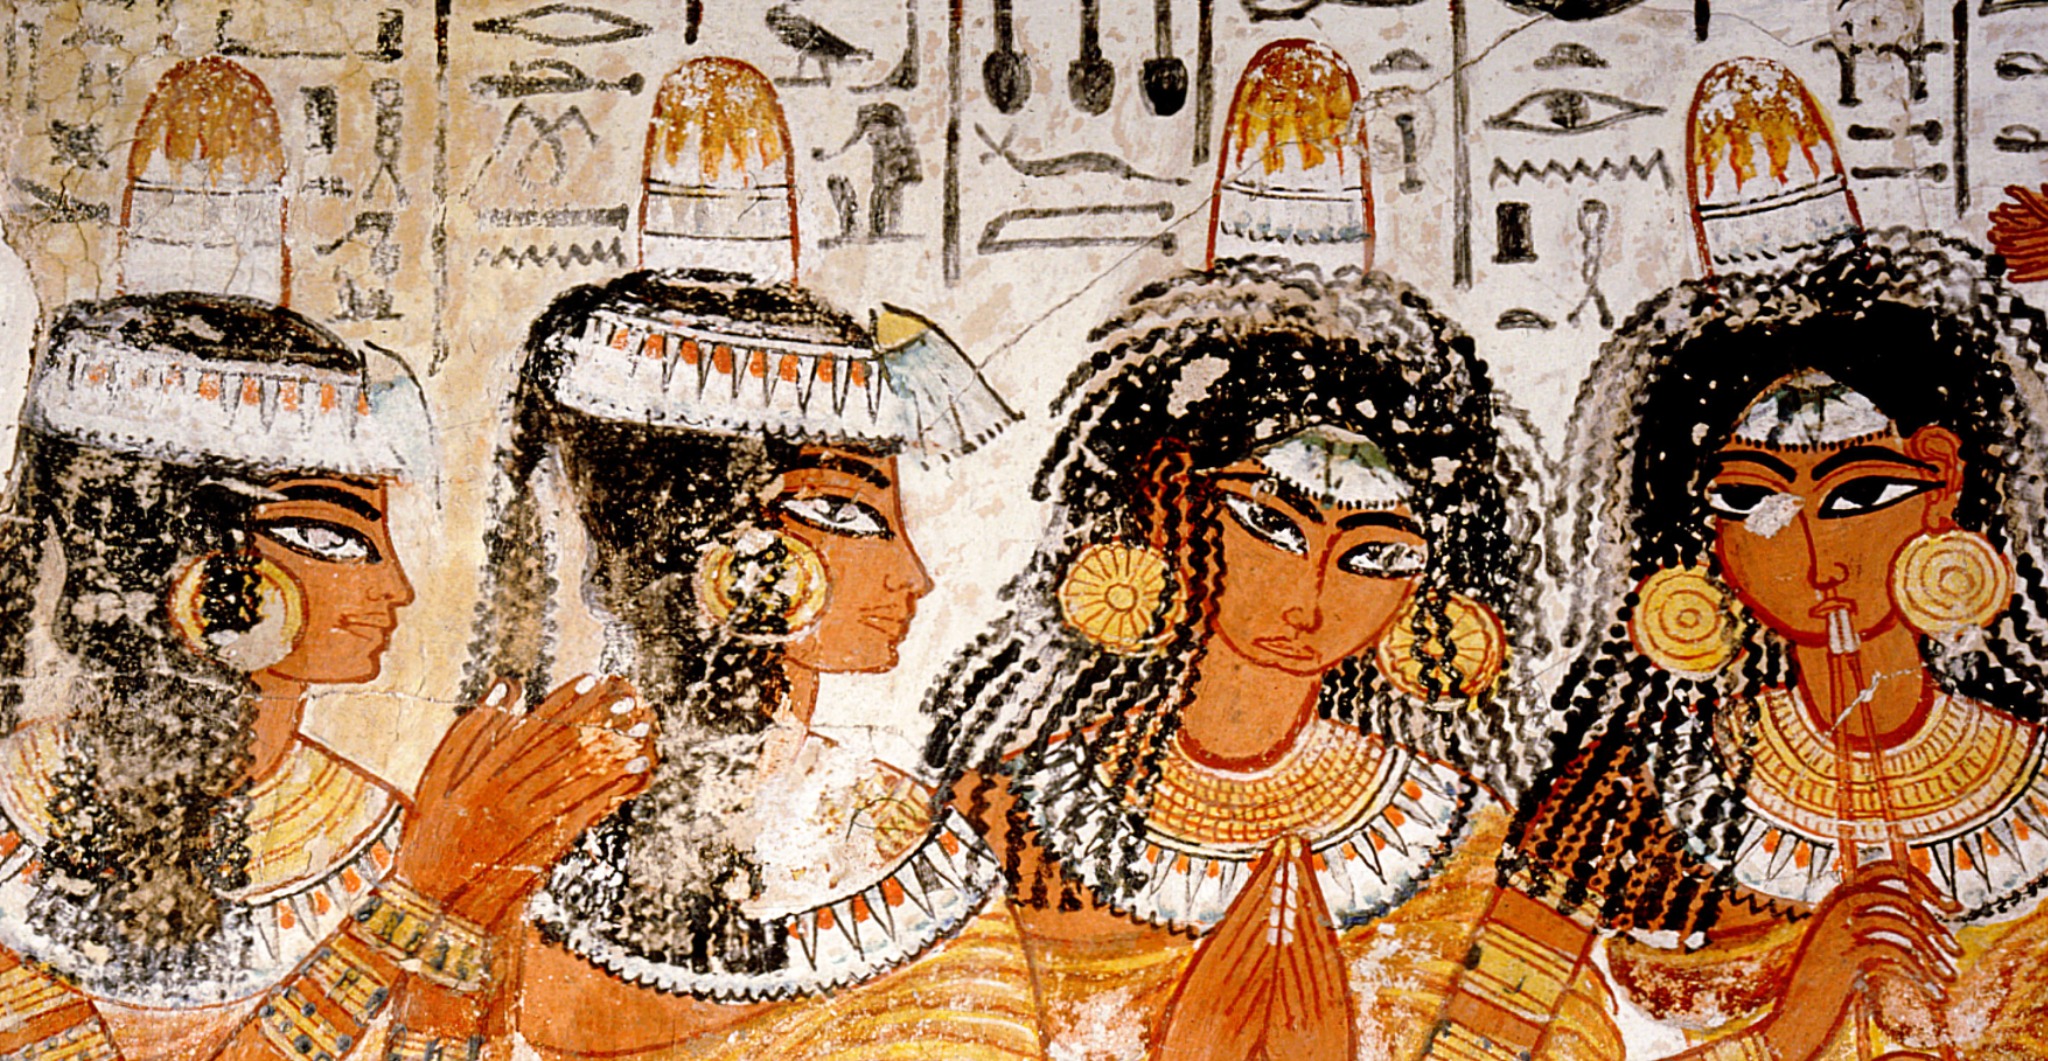 Depiction of women with head cones from Ancient Egypt. Getty Images